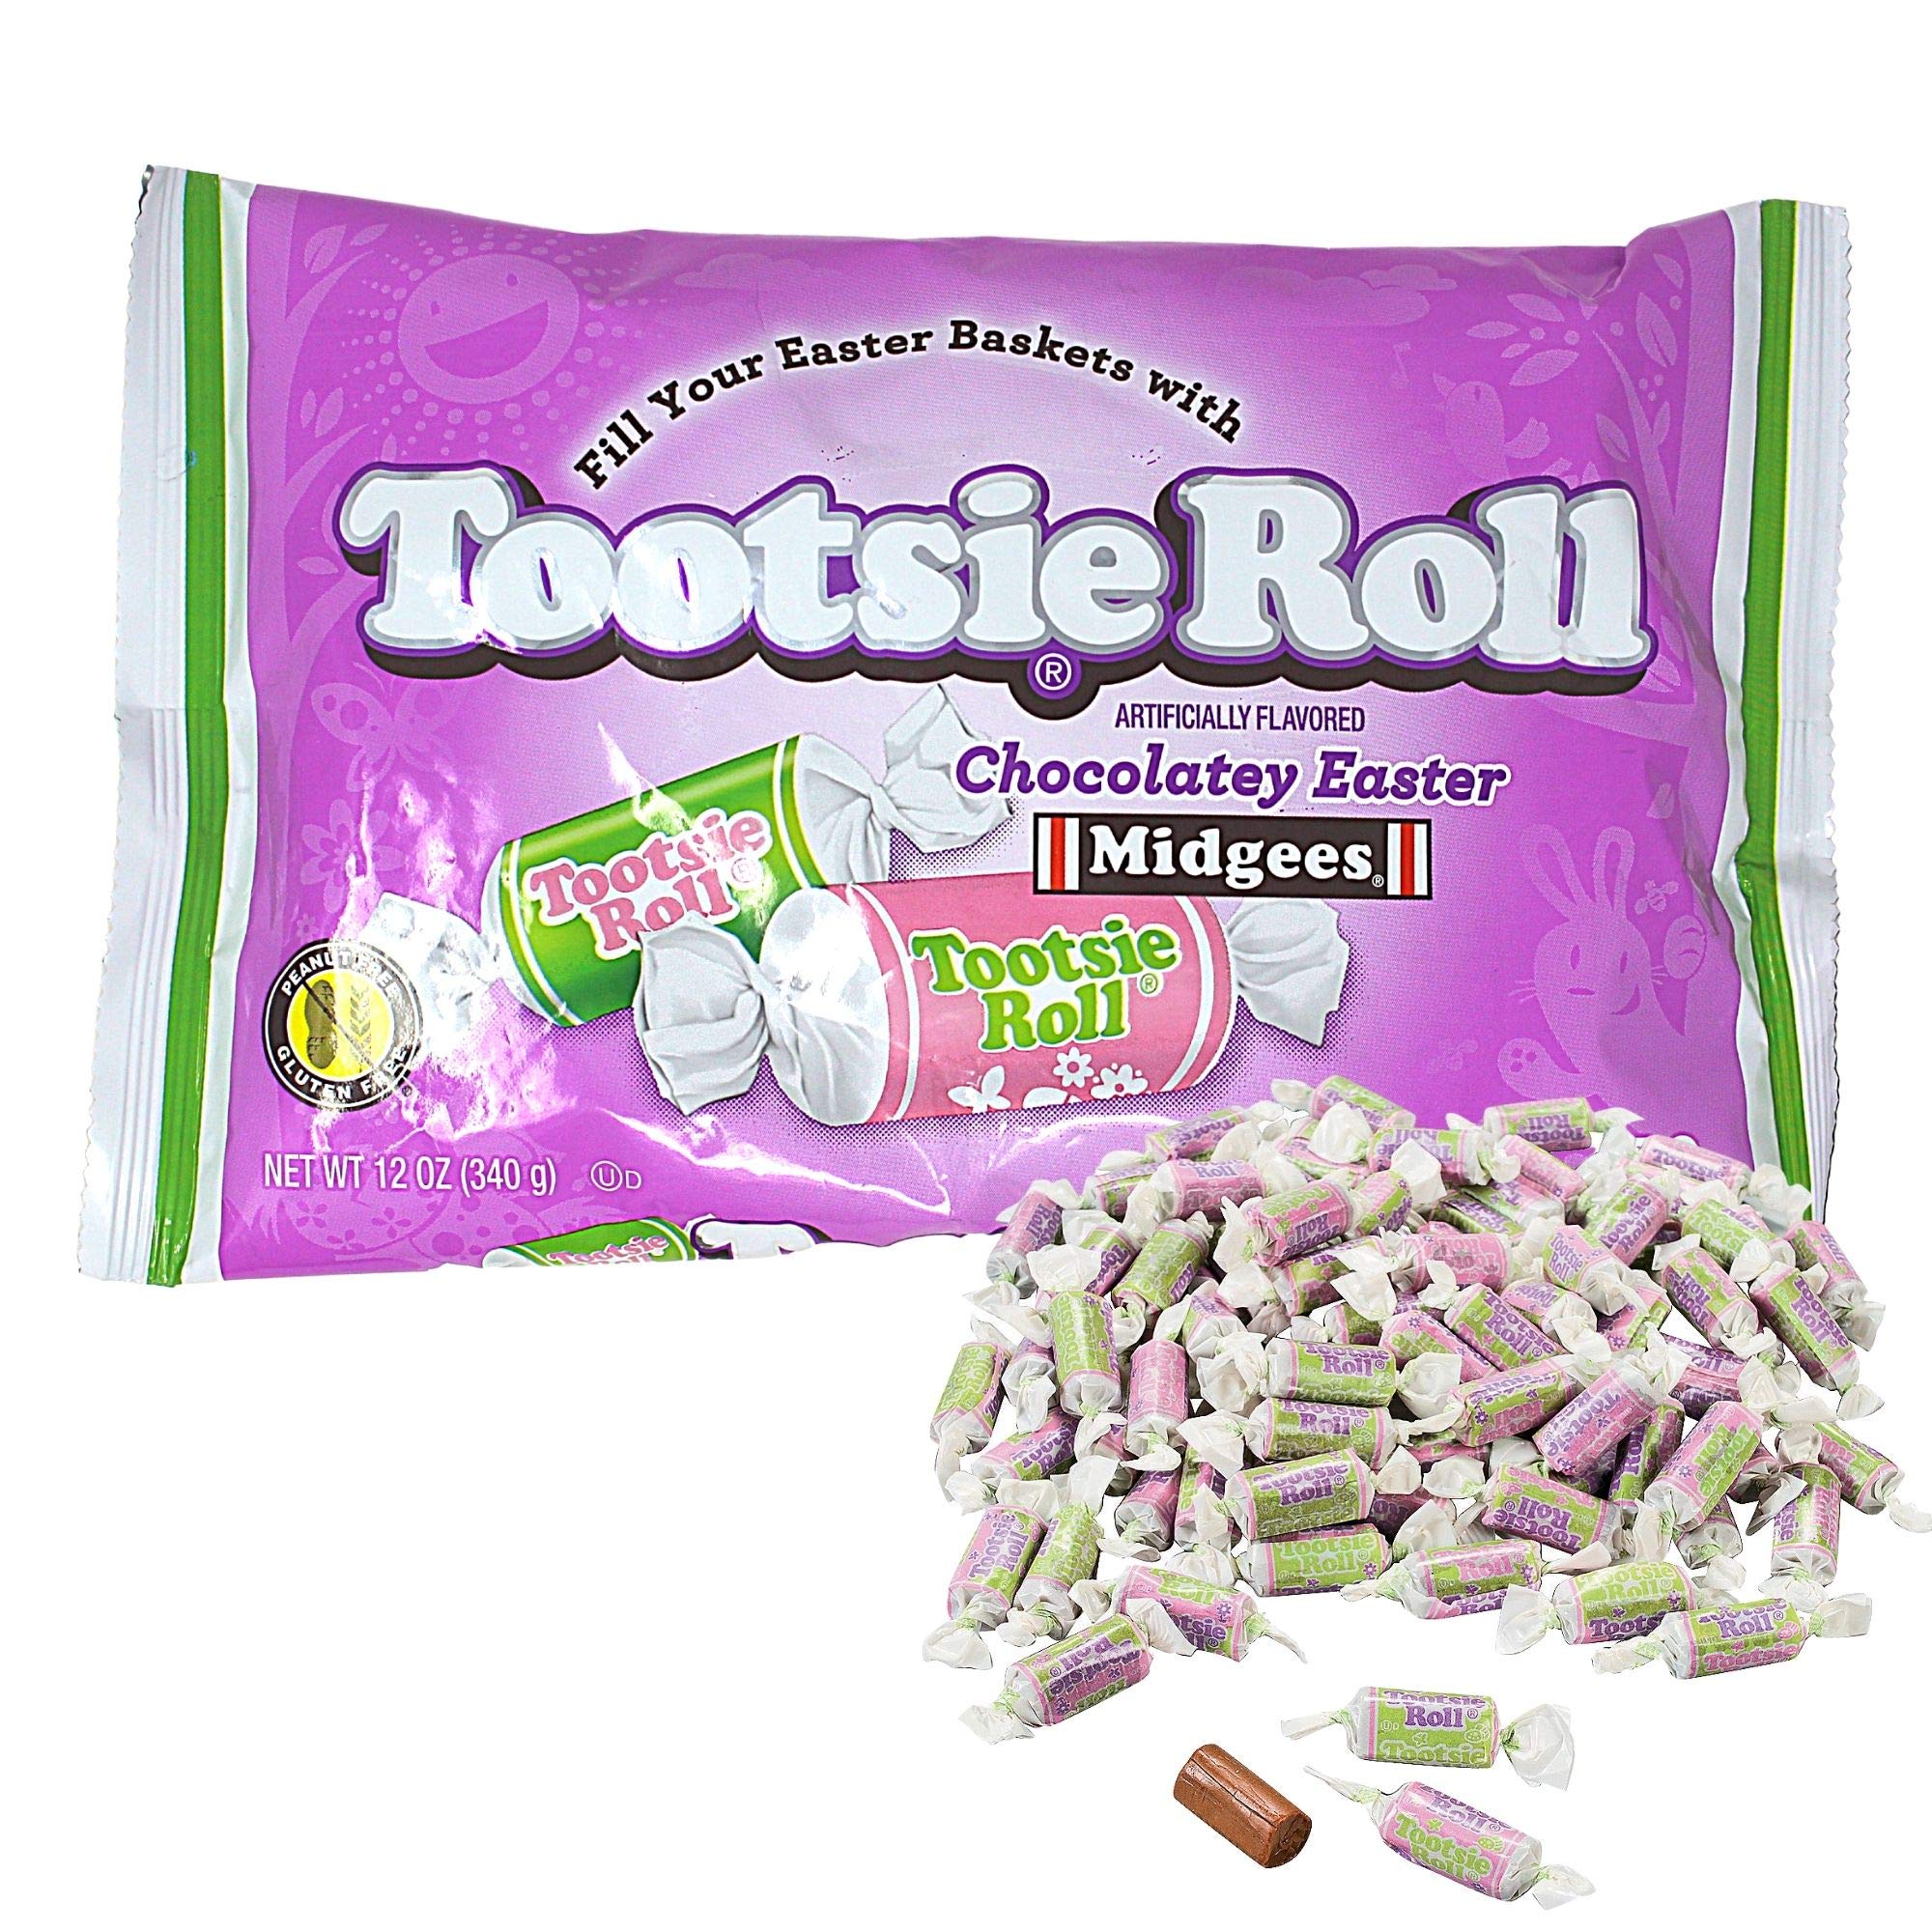 Tootsie Roll Chocolatey Midgees Easter Candy, 50 Count, 12 oz Bag